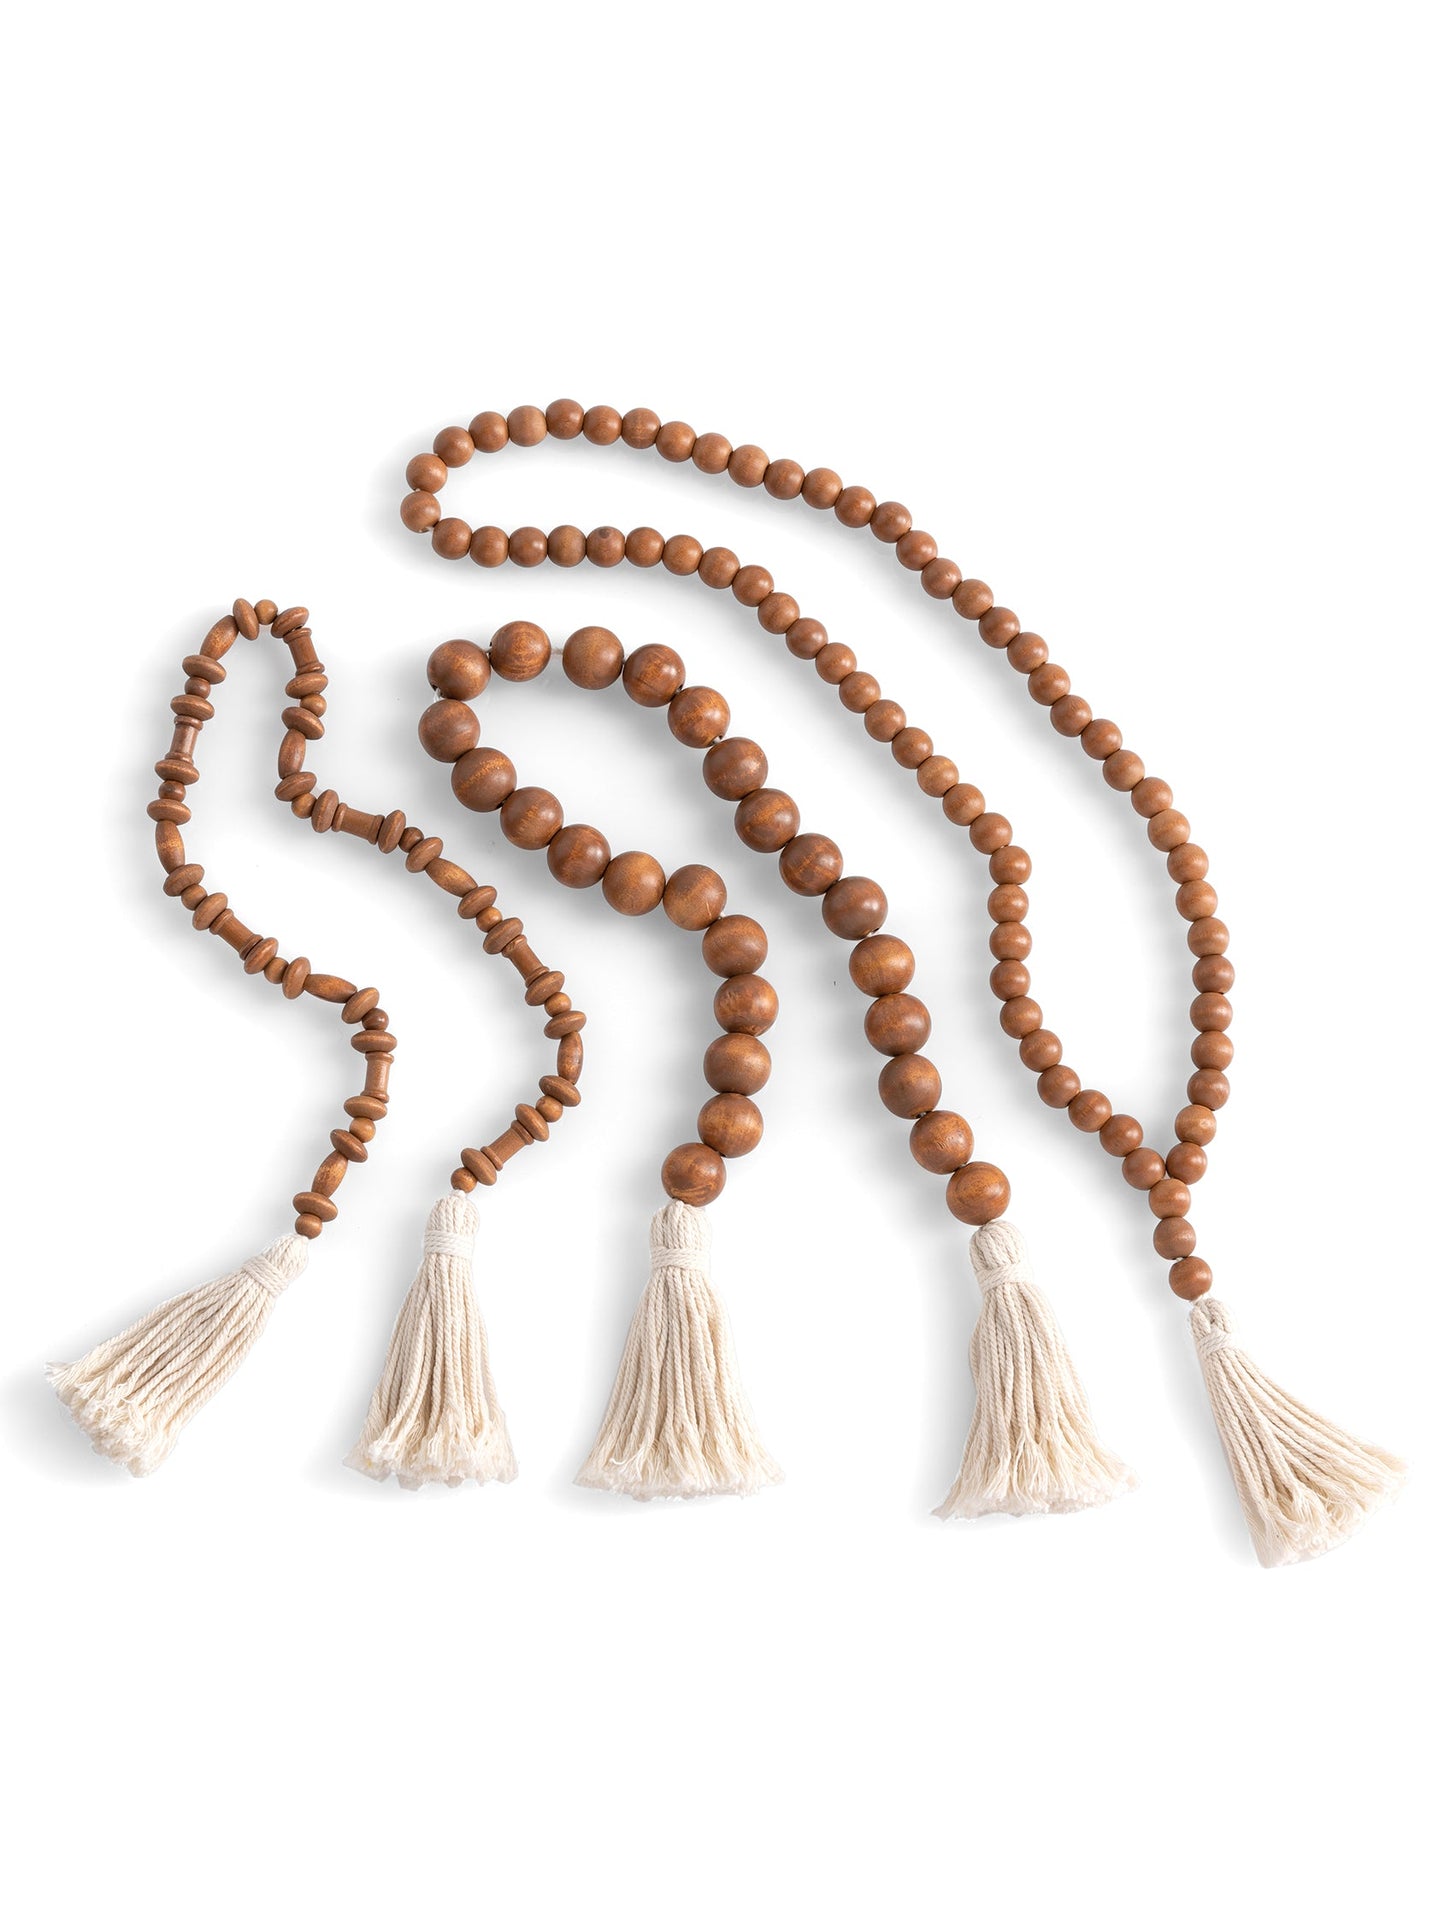 Shiraleah Assorted Set of 3 Wood Prayer Beads, Brown - FINAL SALE ONLY by Shiraleah